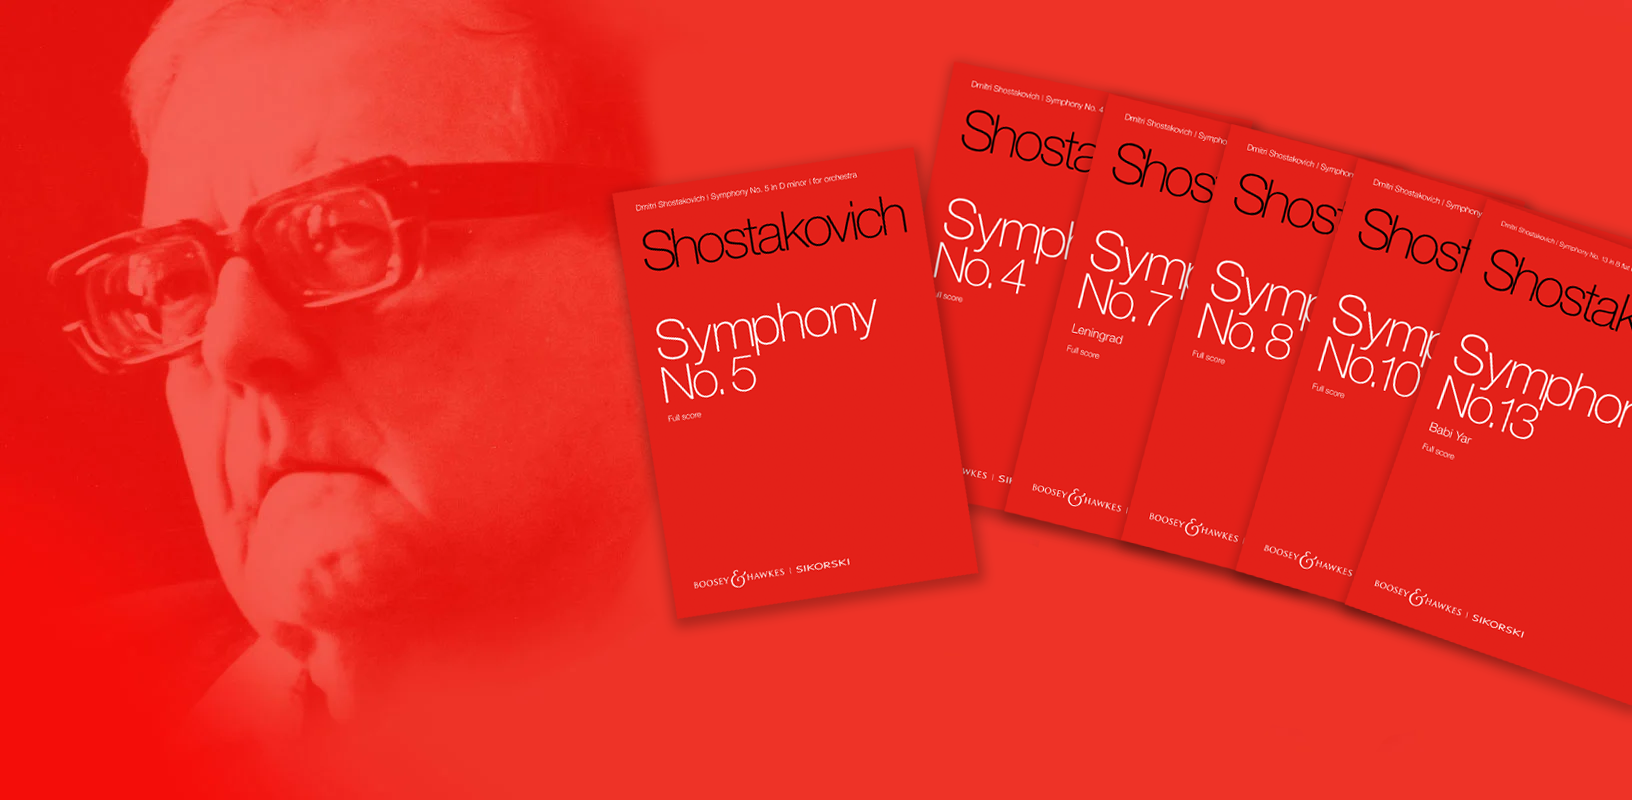 Latest Shostakovich publications released in new symphony edition